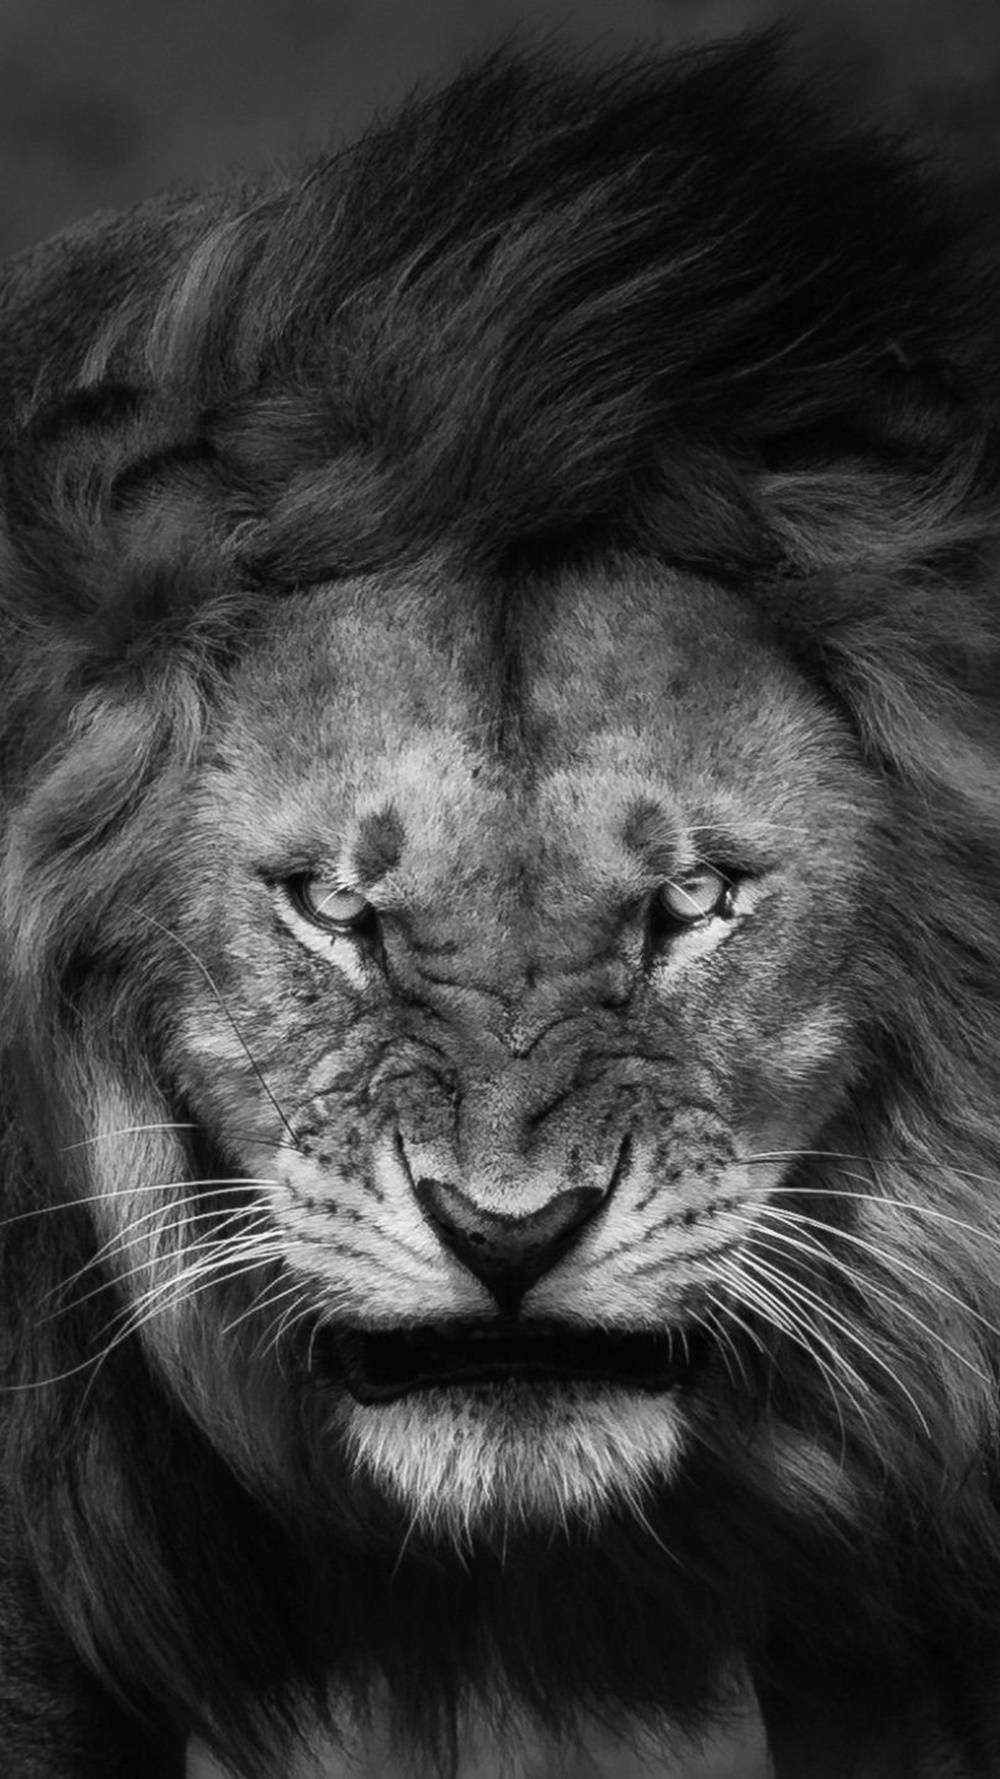 Free Lion Wallpaper Downloads, [600+] Lion Wallpapers for FREE | Wallpapers .com